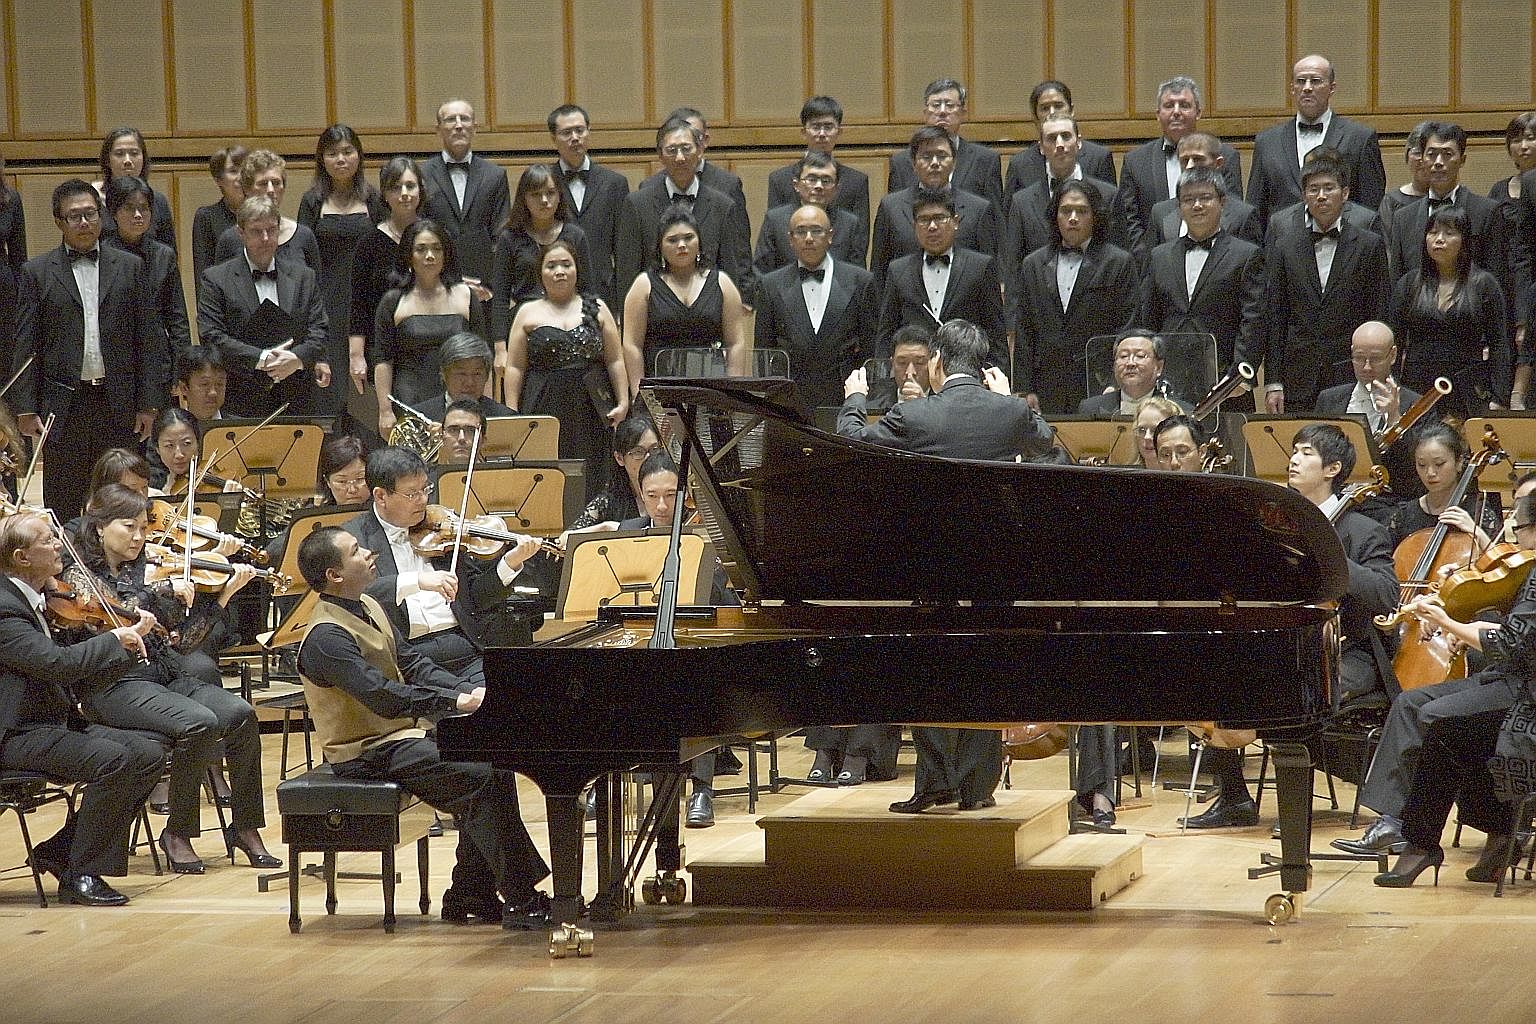 WATCH: A classical music 2 performance by SSO